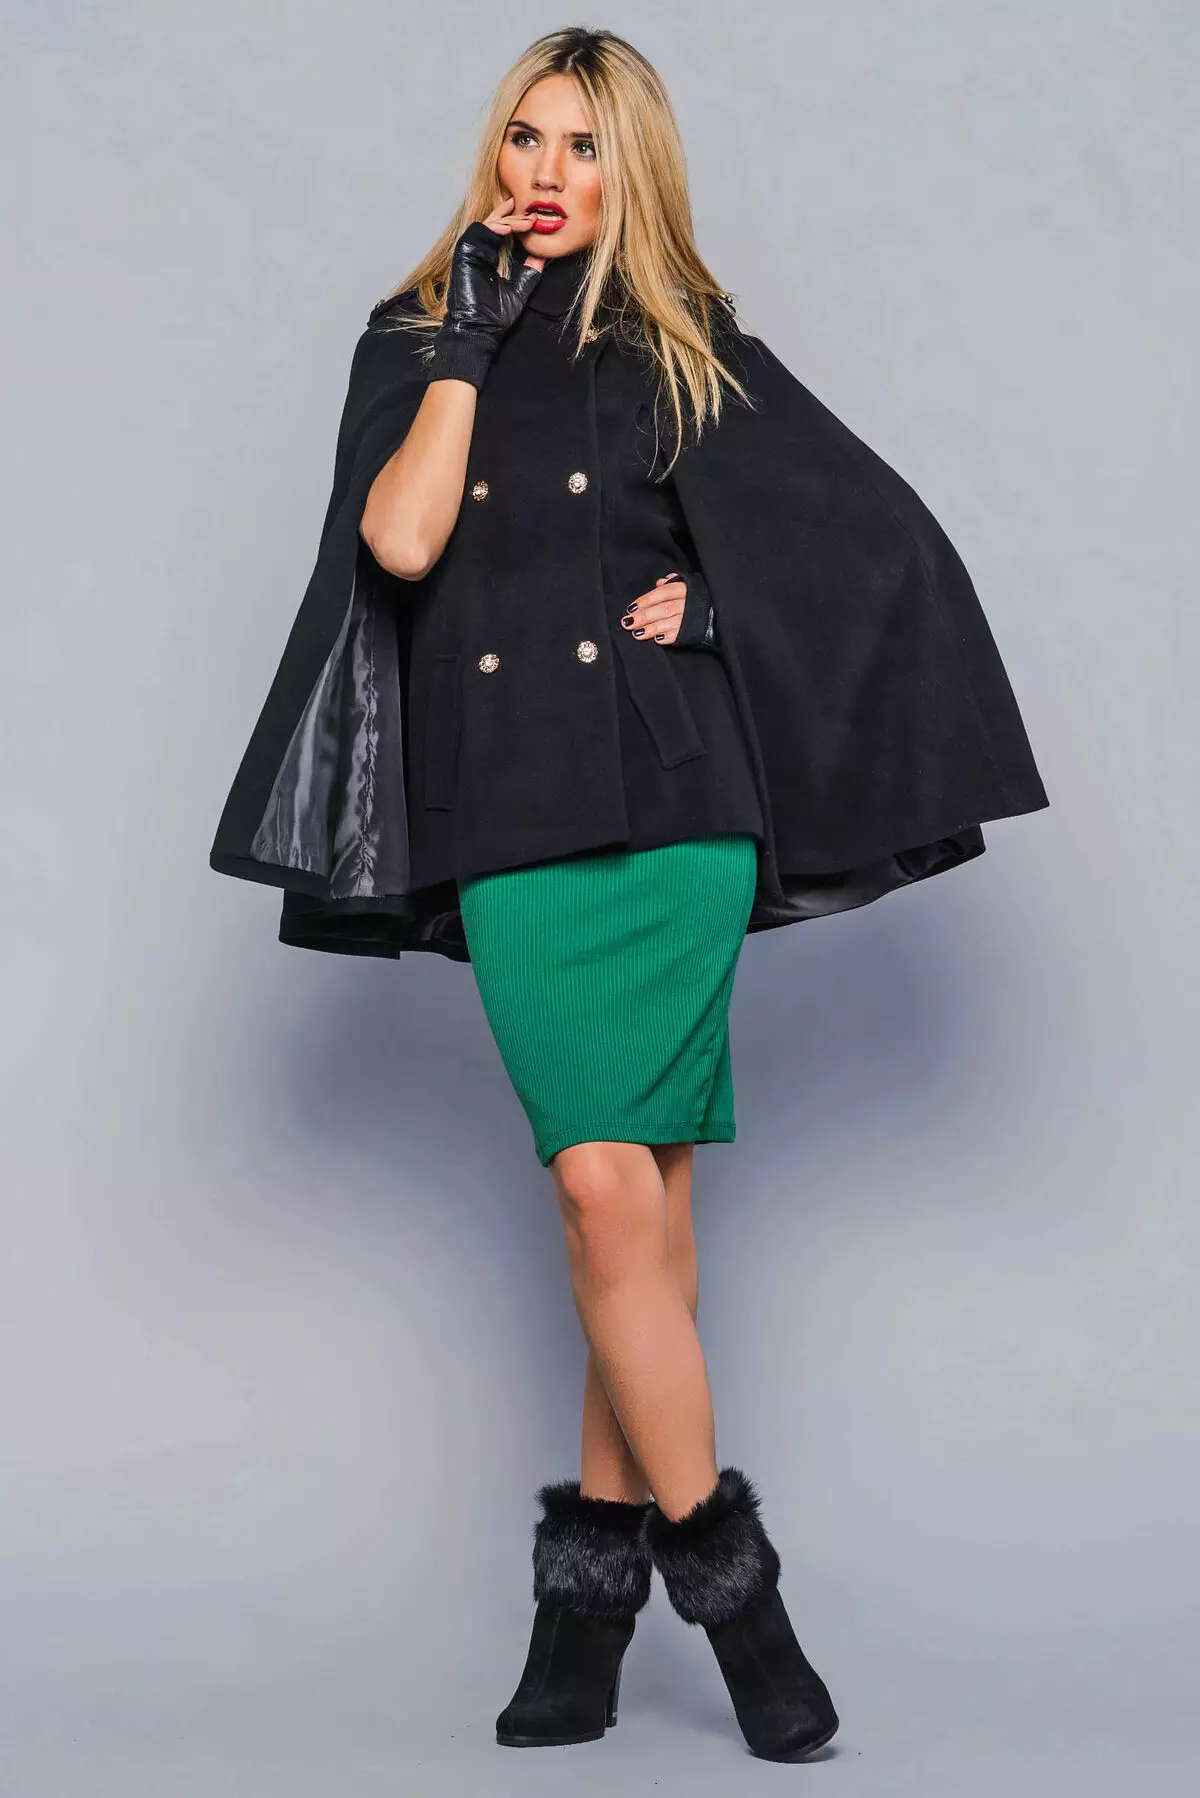 Babae Black Coat (172 Photos): Long, Short, Hooded, Black and White, Straight, Leather Sleeves, Fit, Leather 611_55